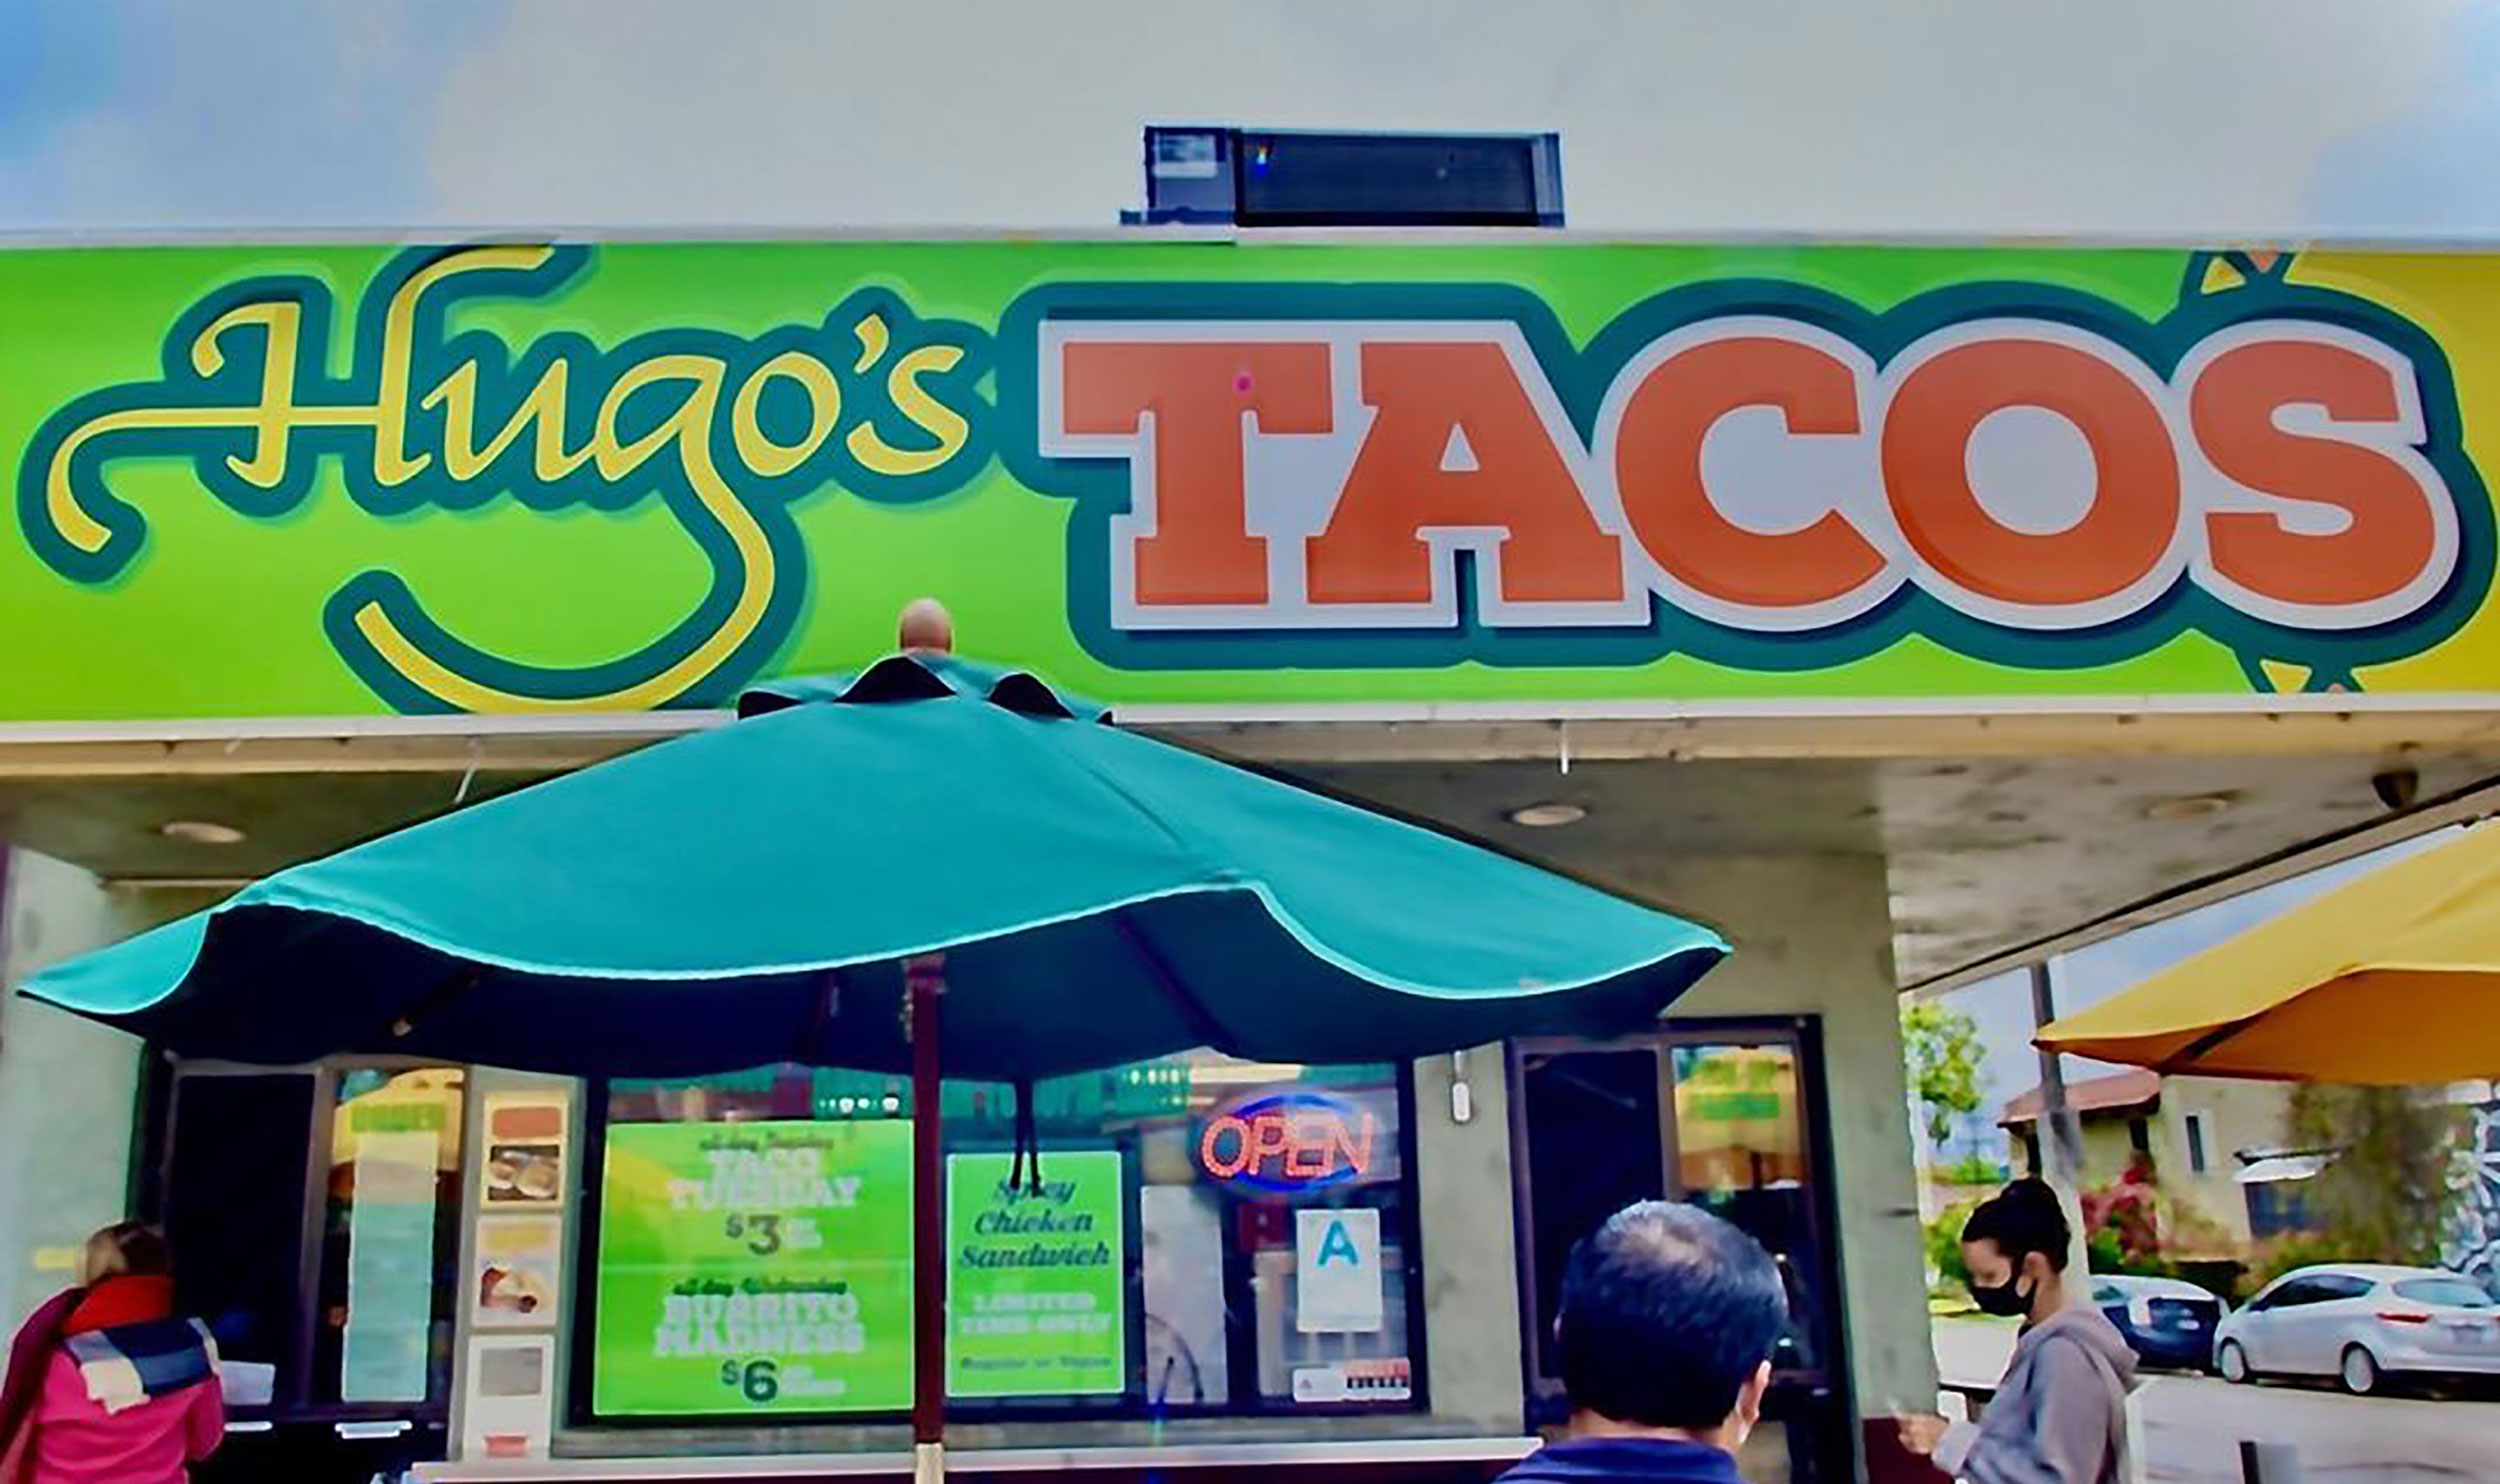 The closure of Hugo's Tacos two Los Angeles outlets was unprecedented for the institution, which has operated for 15 years.